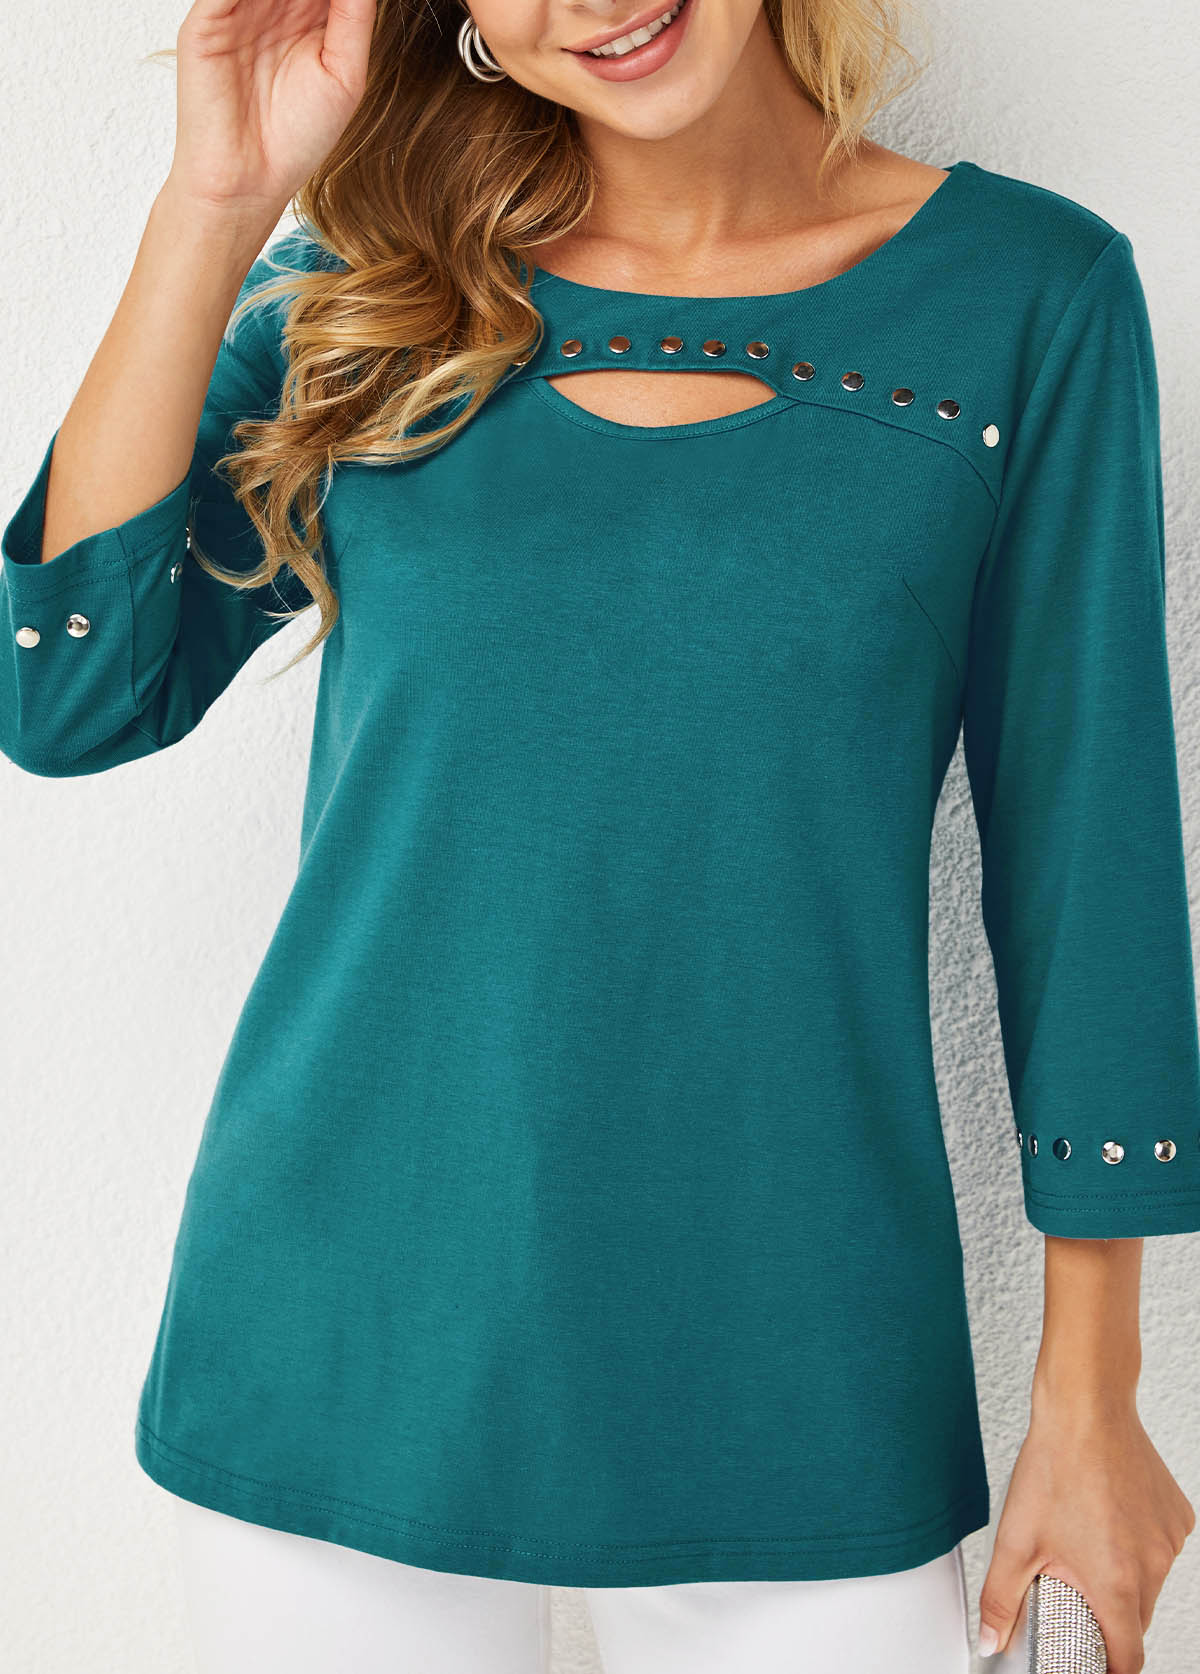 Cutout Front Round Neck 3/4 Sleeve T Shirt